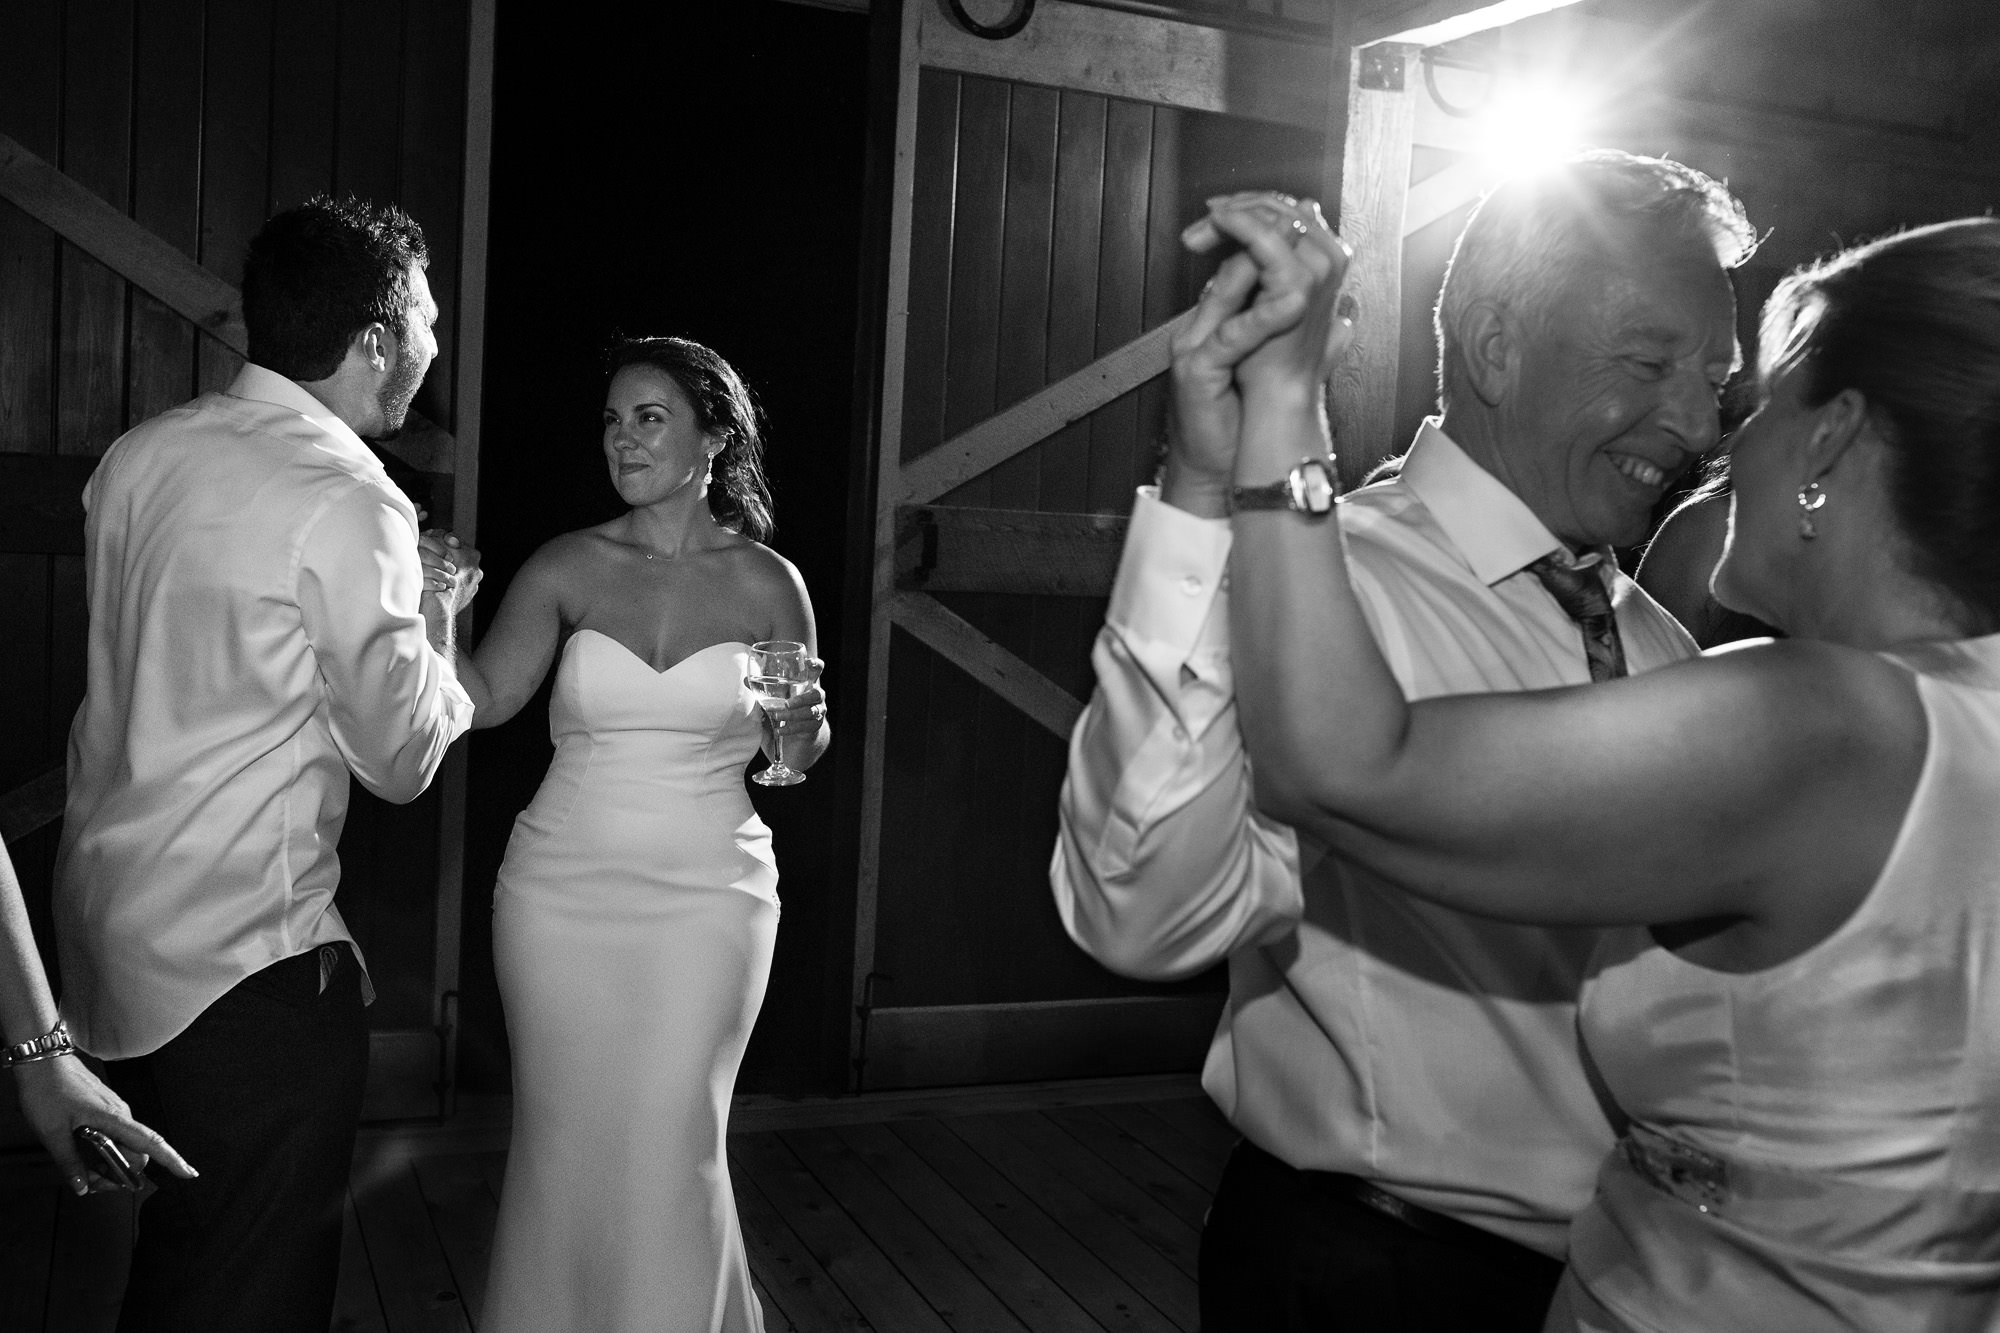 The bride and groom dance with friends and family at their destination barn wedding in Maine